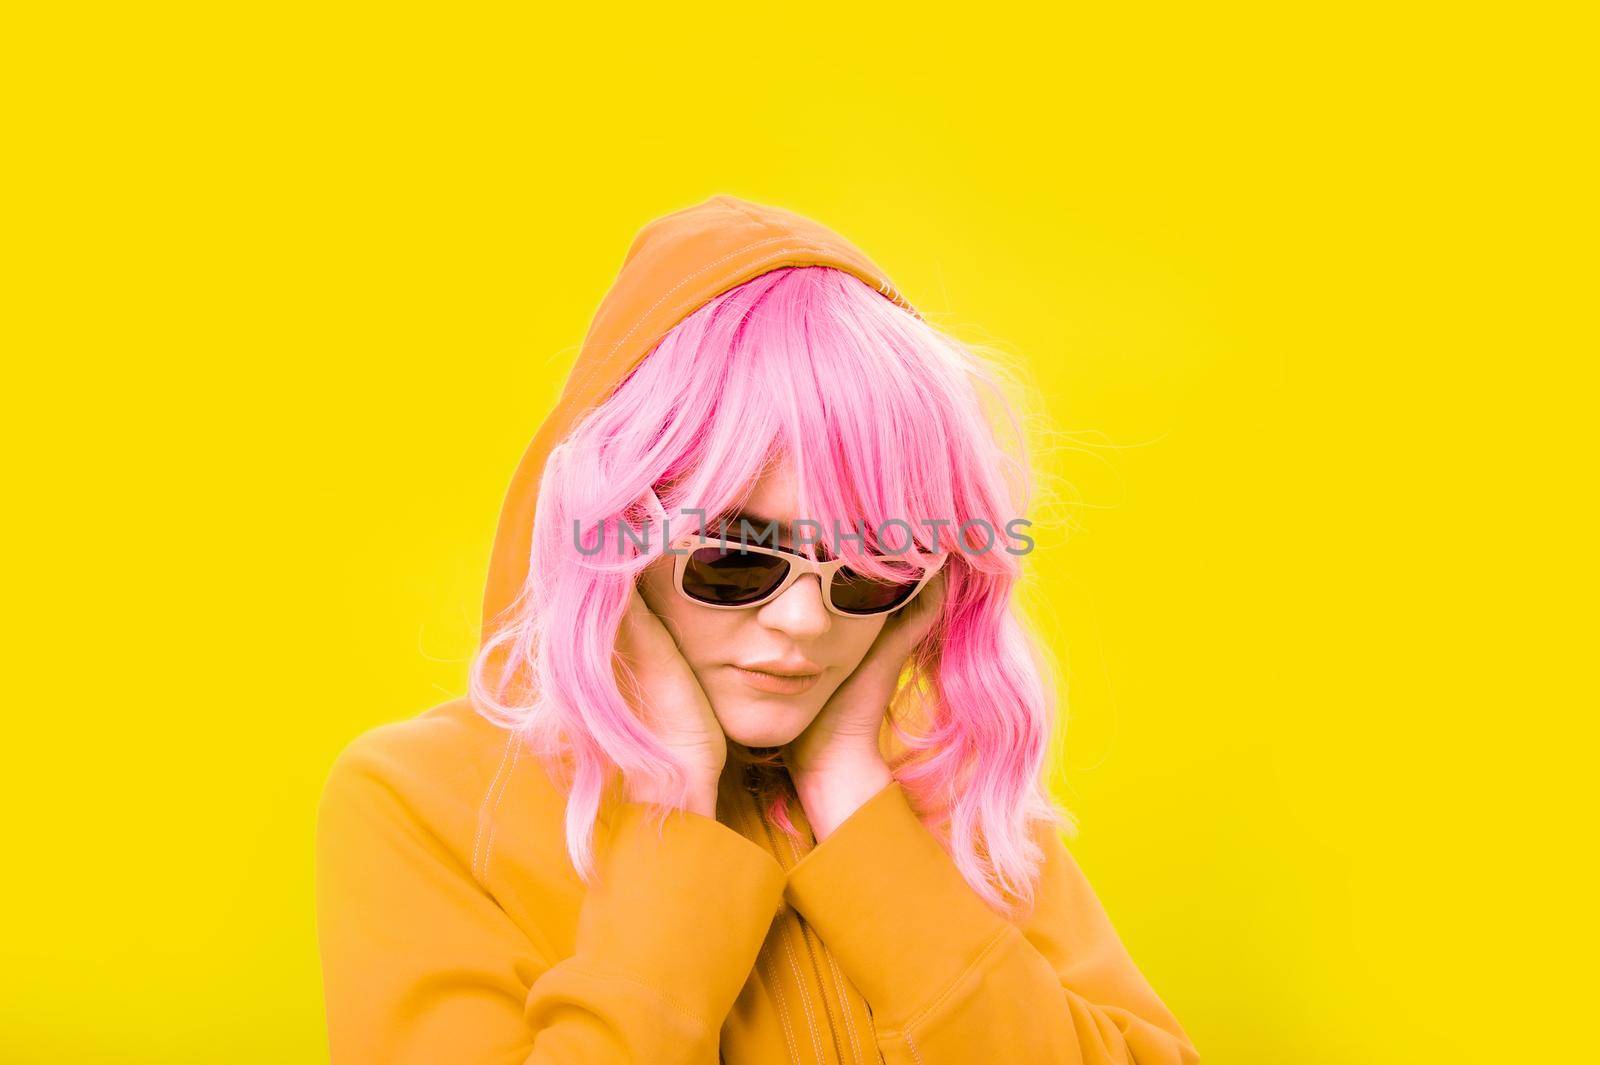 Alternative funky girl with pink hair on yellow background. Close up fashion portrait young beautiful woman in hoodie and glasses. Unusual youth fashion concept. Hot image.